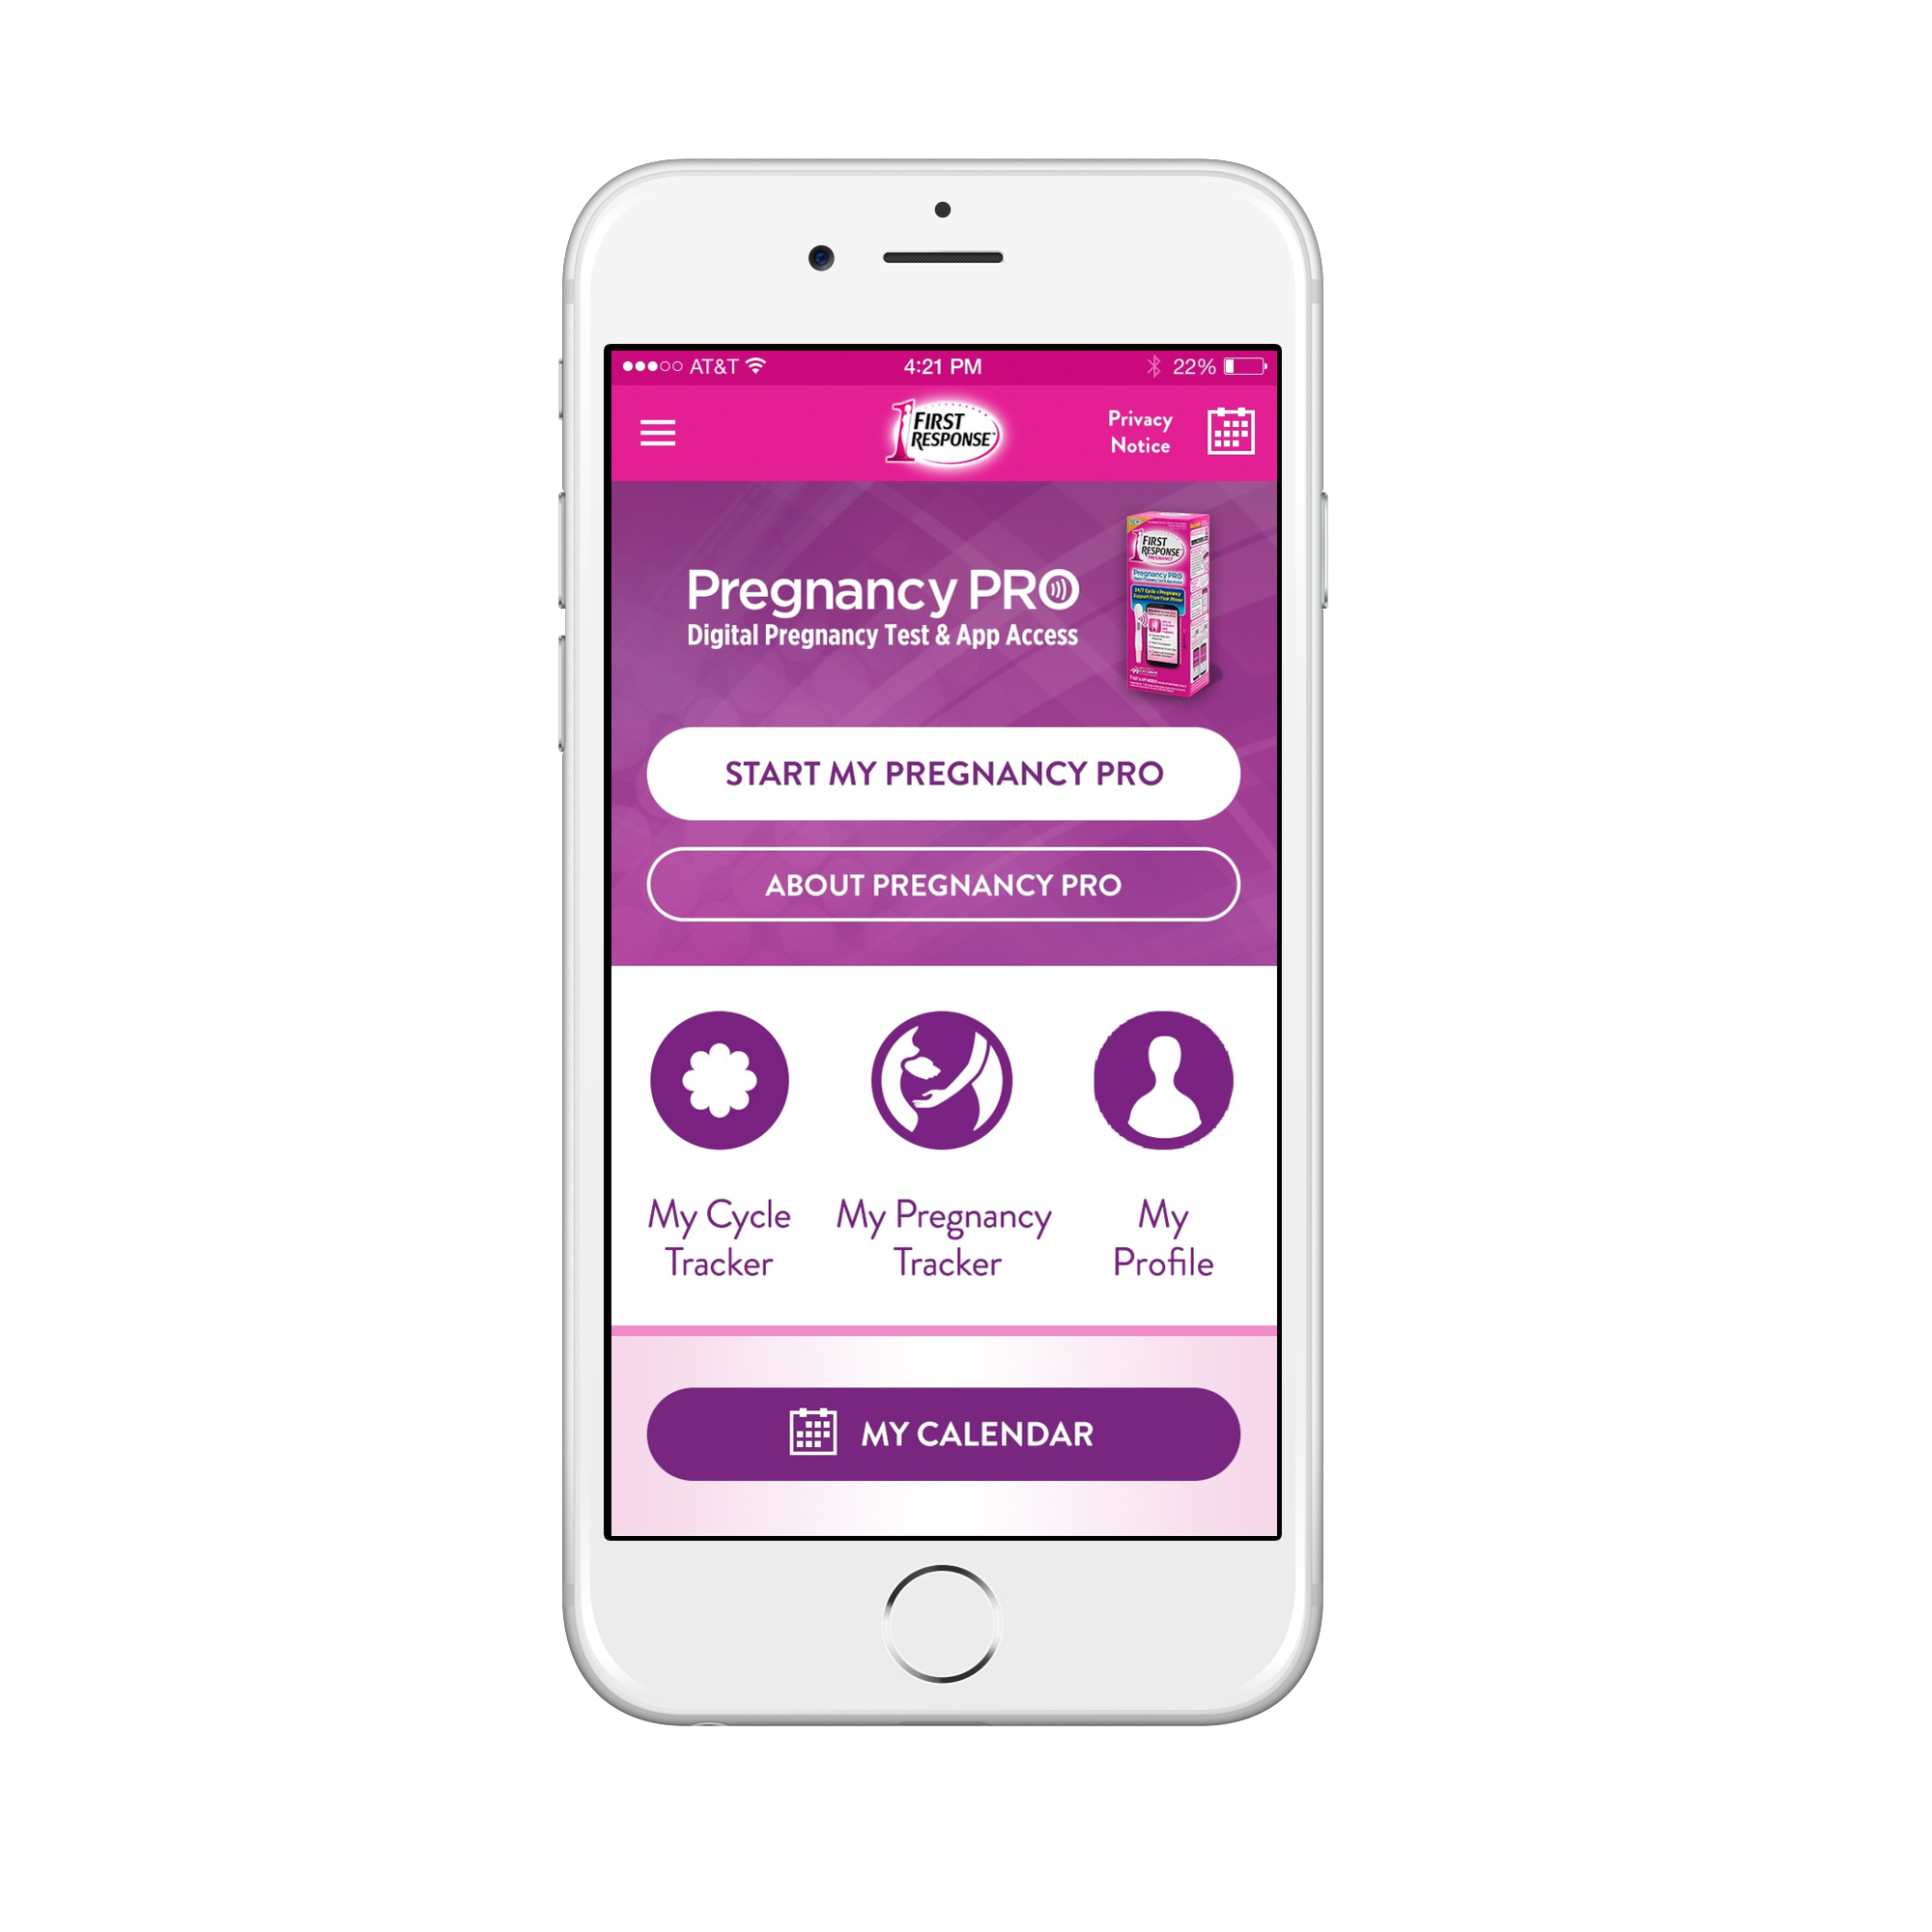 Mobile screenshot of First Response™ Pregnancy PRO Digital Pregnancy Test and App Access, the first Bluetooth® enabled pregnancy test, unveiled at 2016 CES